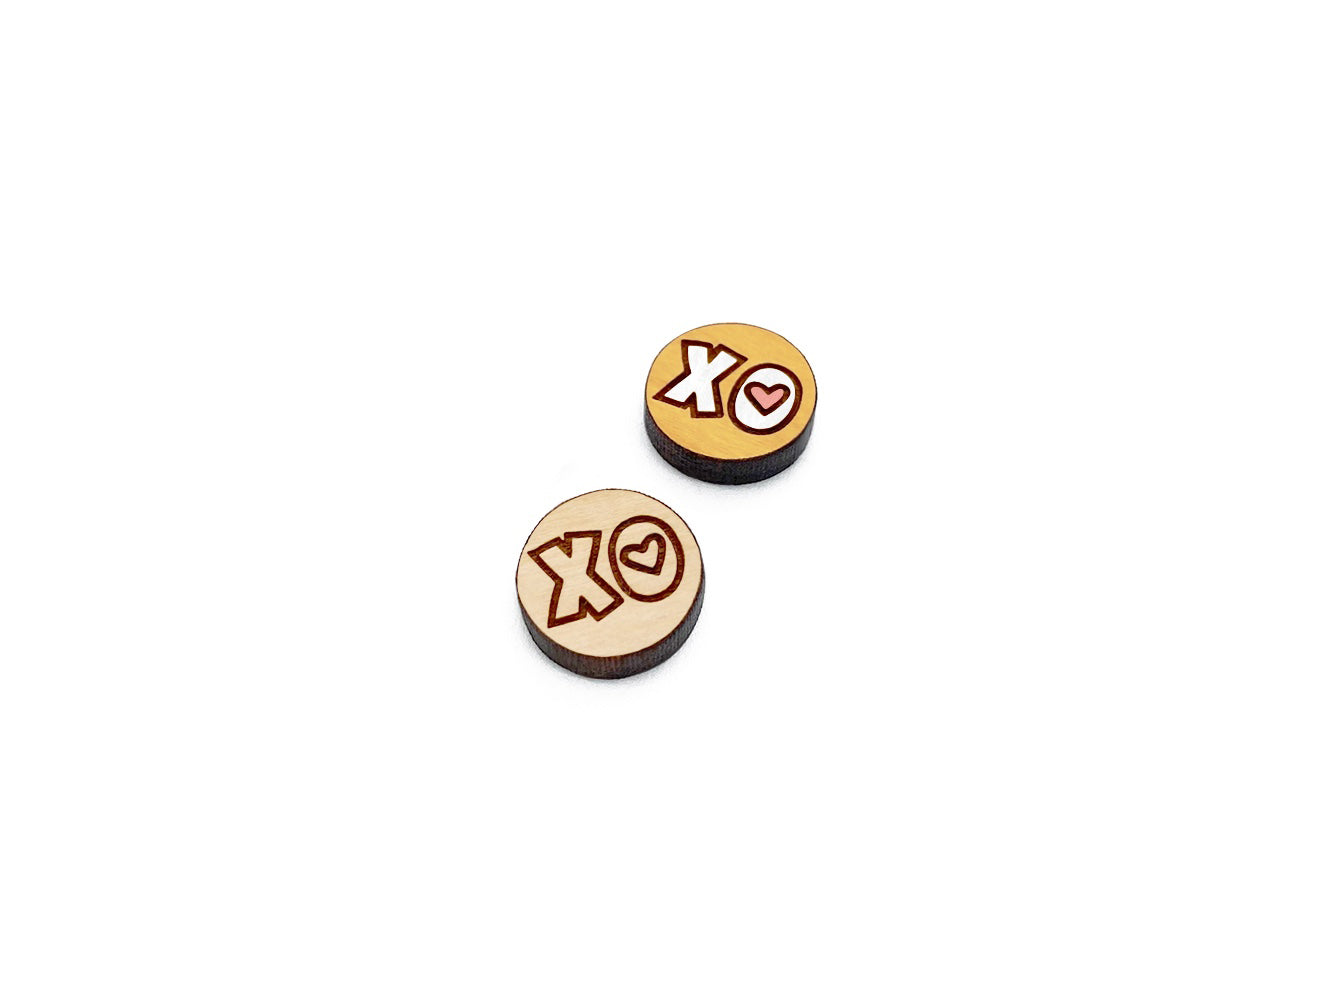 a pair of round wooden cabochon earring blanks engraved with an XO Heart design